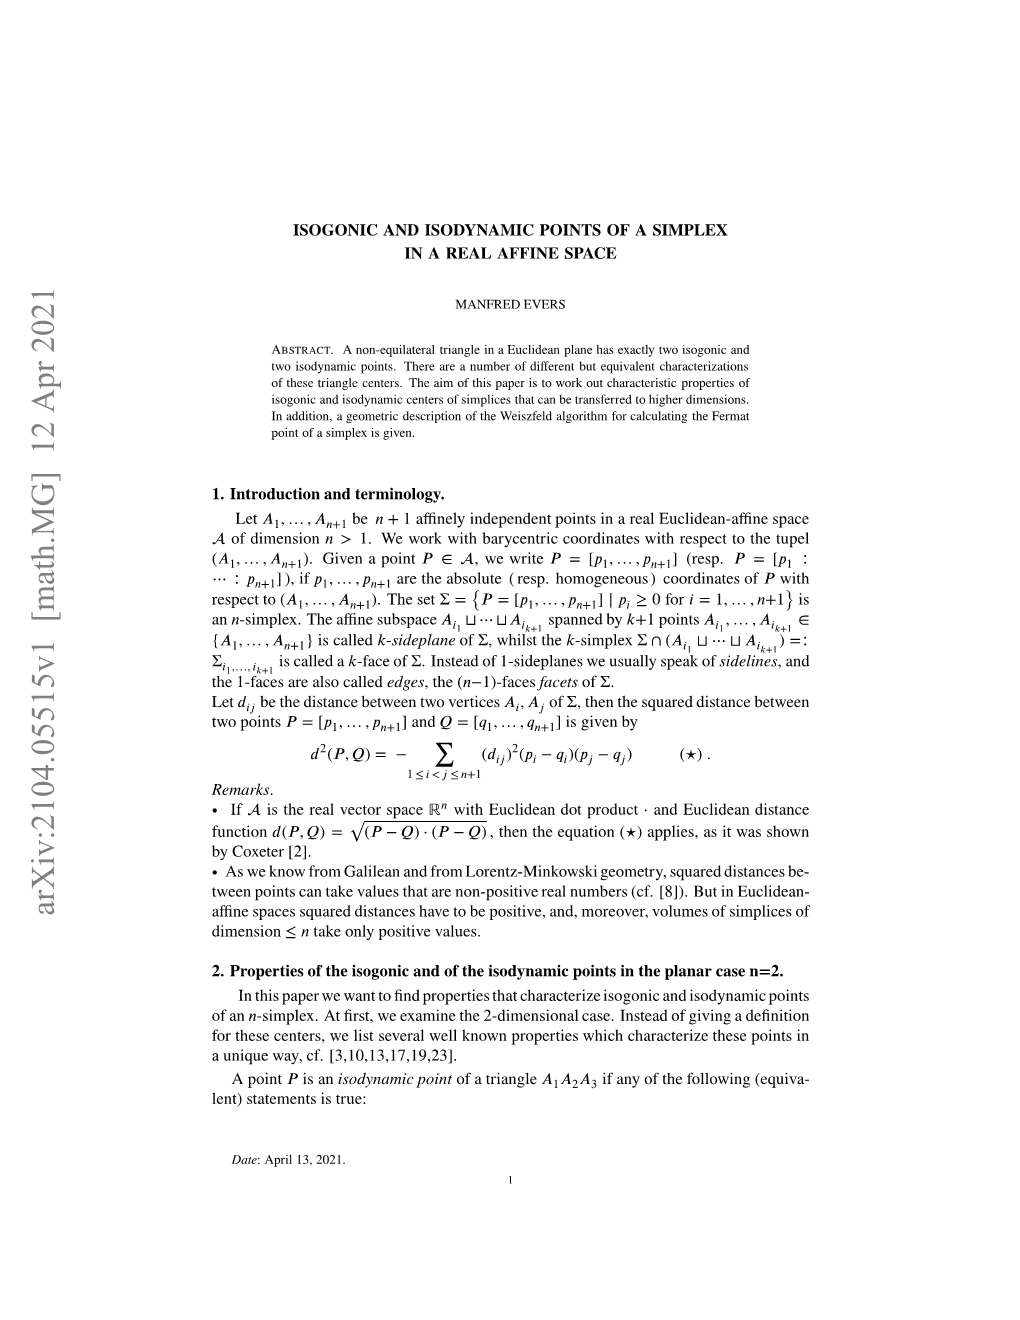 Isogonic and Isodynamic Points of a Simplex in a Real Affine Space